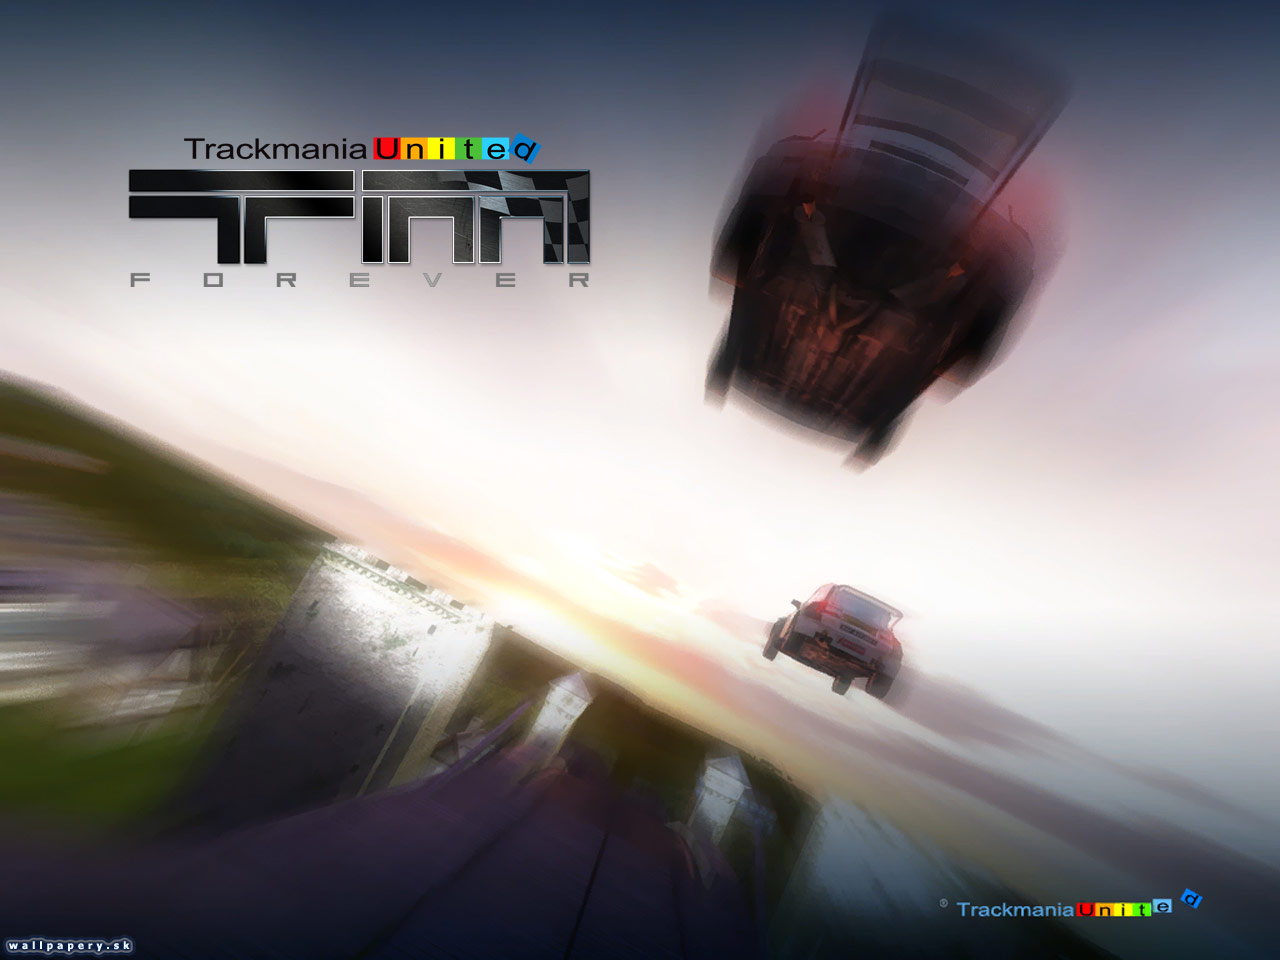 TrackMania United: Forever - wallpaper 2